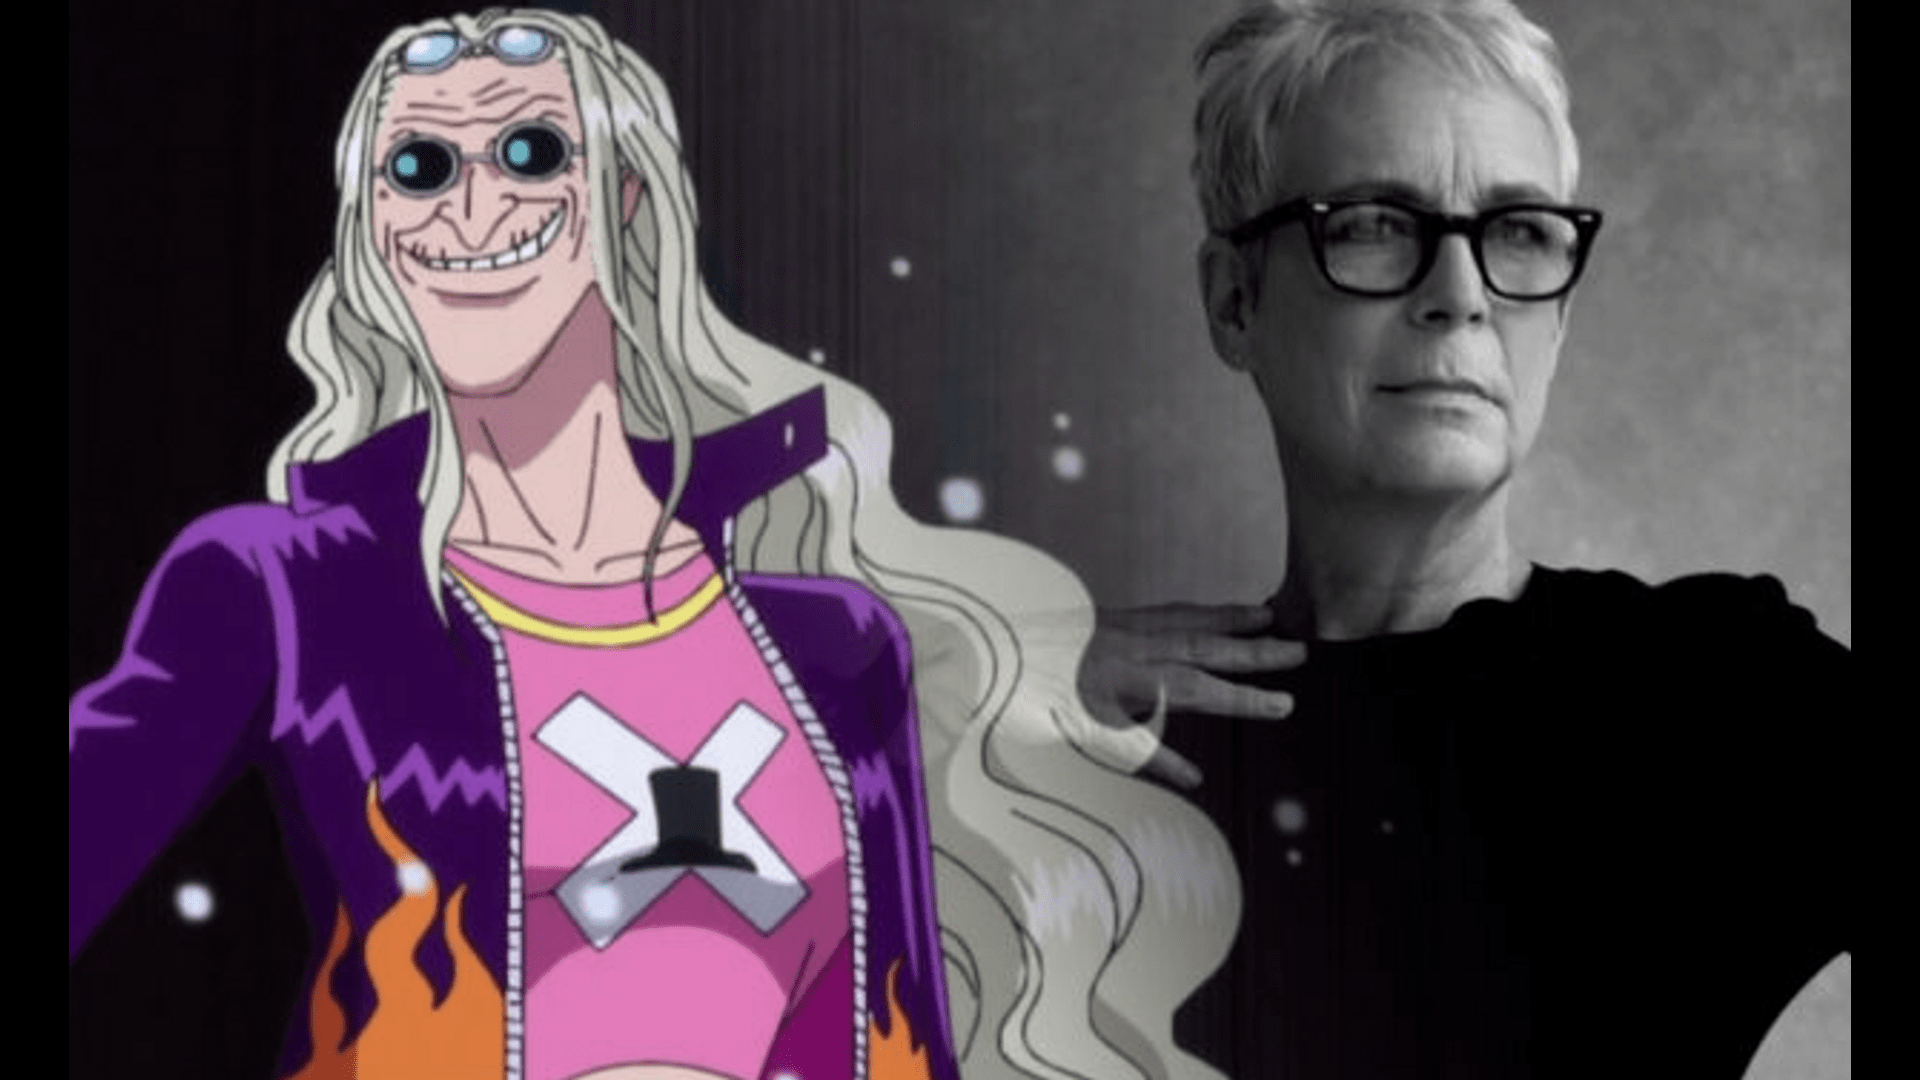 jamie-lee-curtis-will-be-happy-to-join-onepiece-live-action-as-kureha